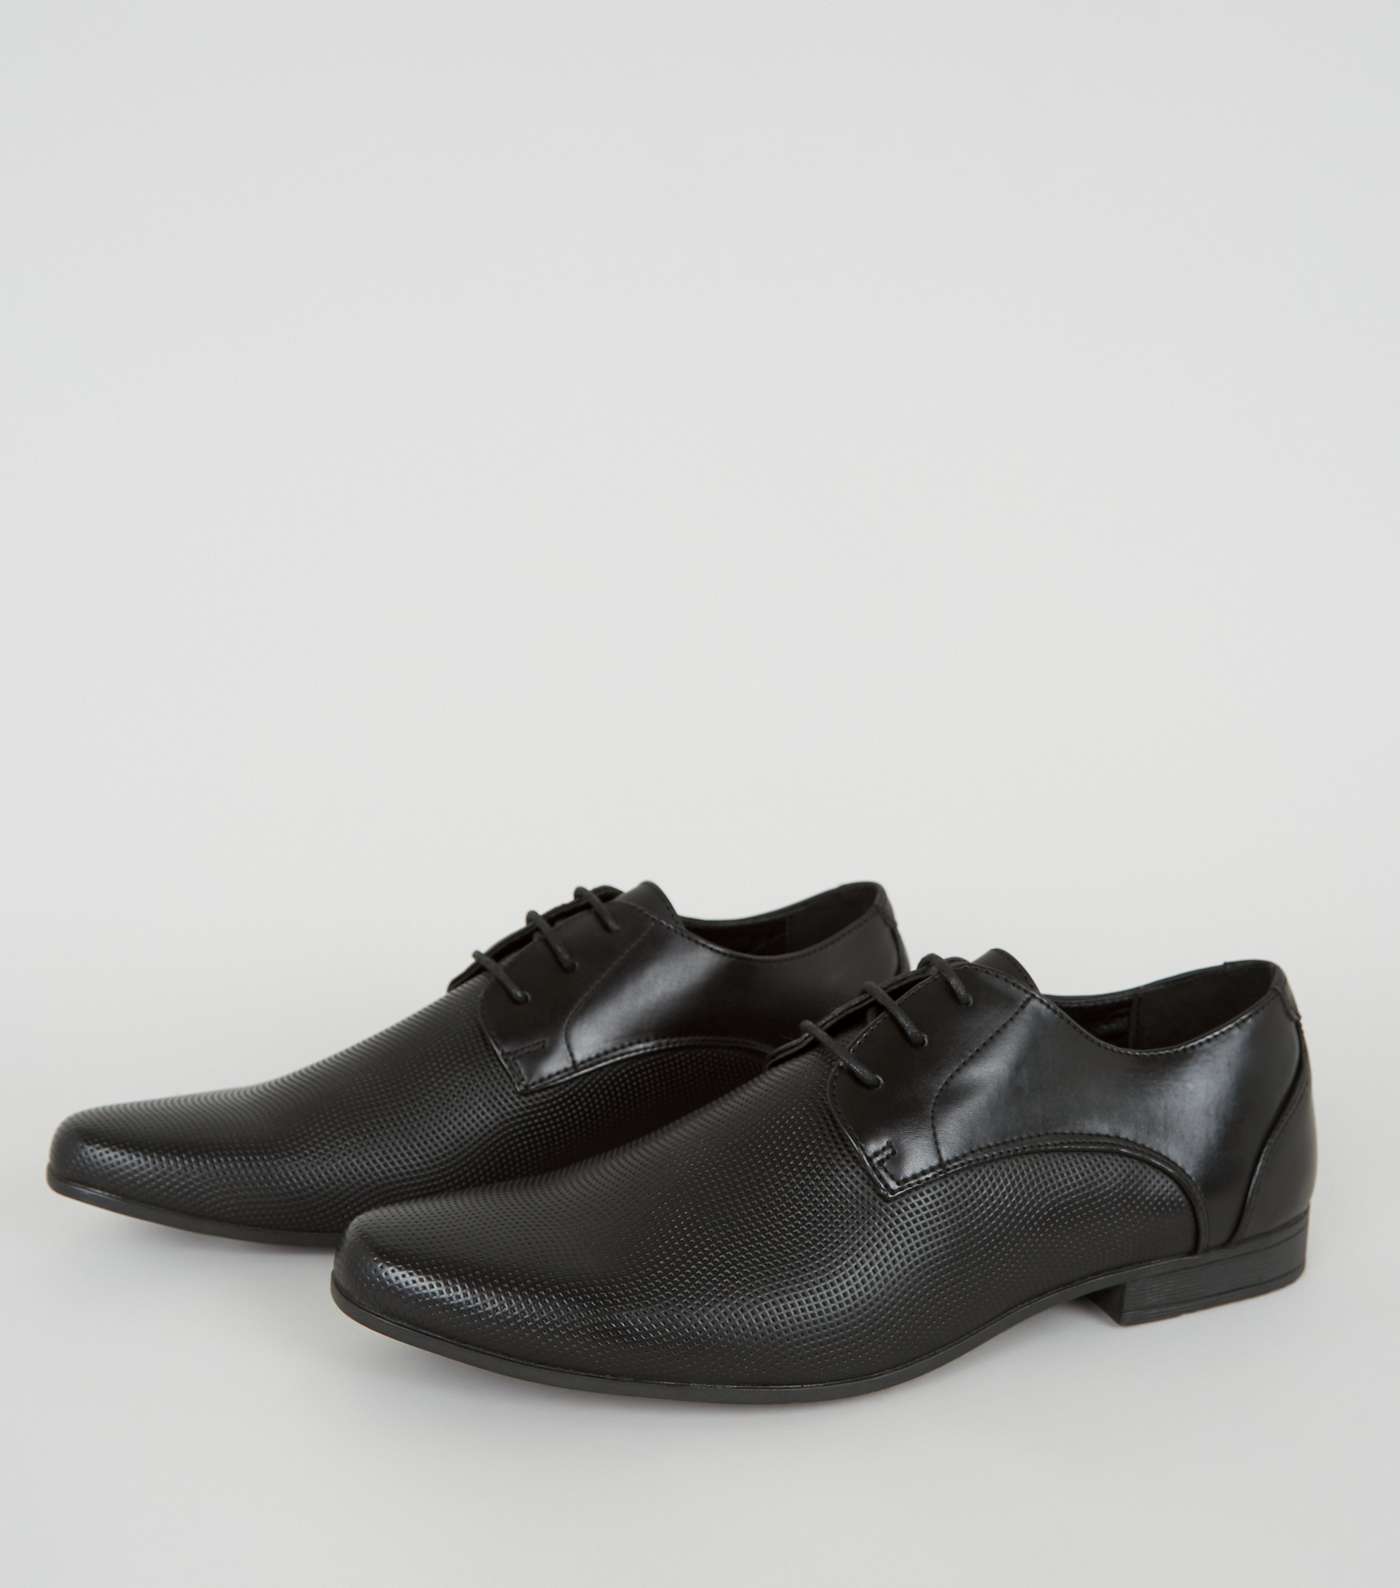 Black Perforated Formal Shoes Image 4